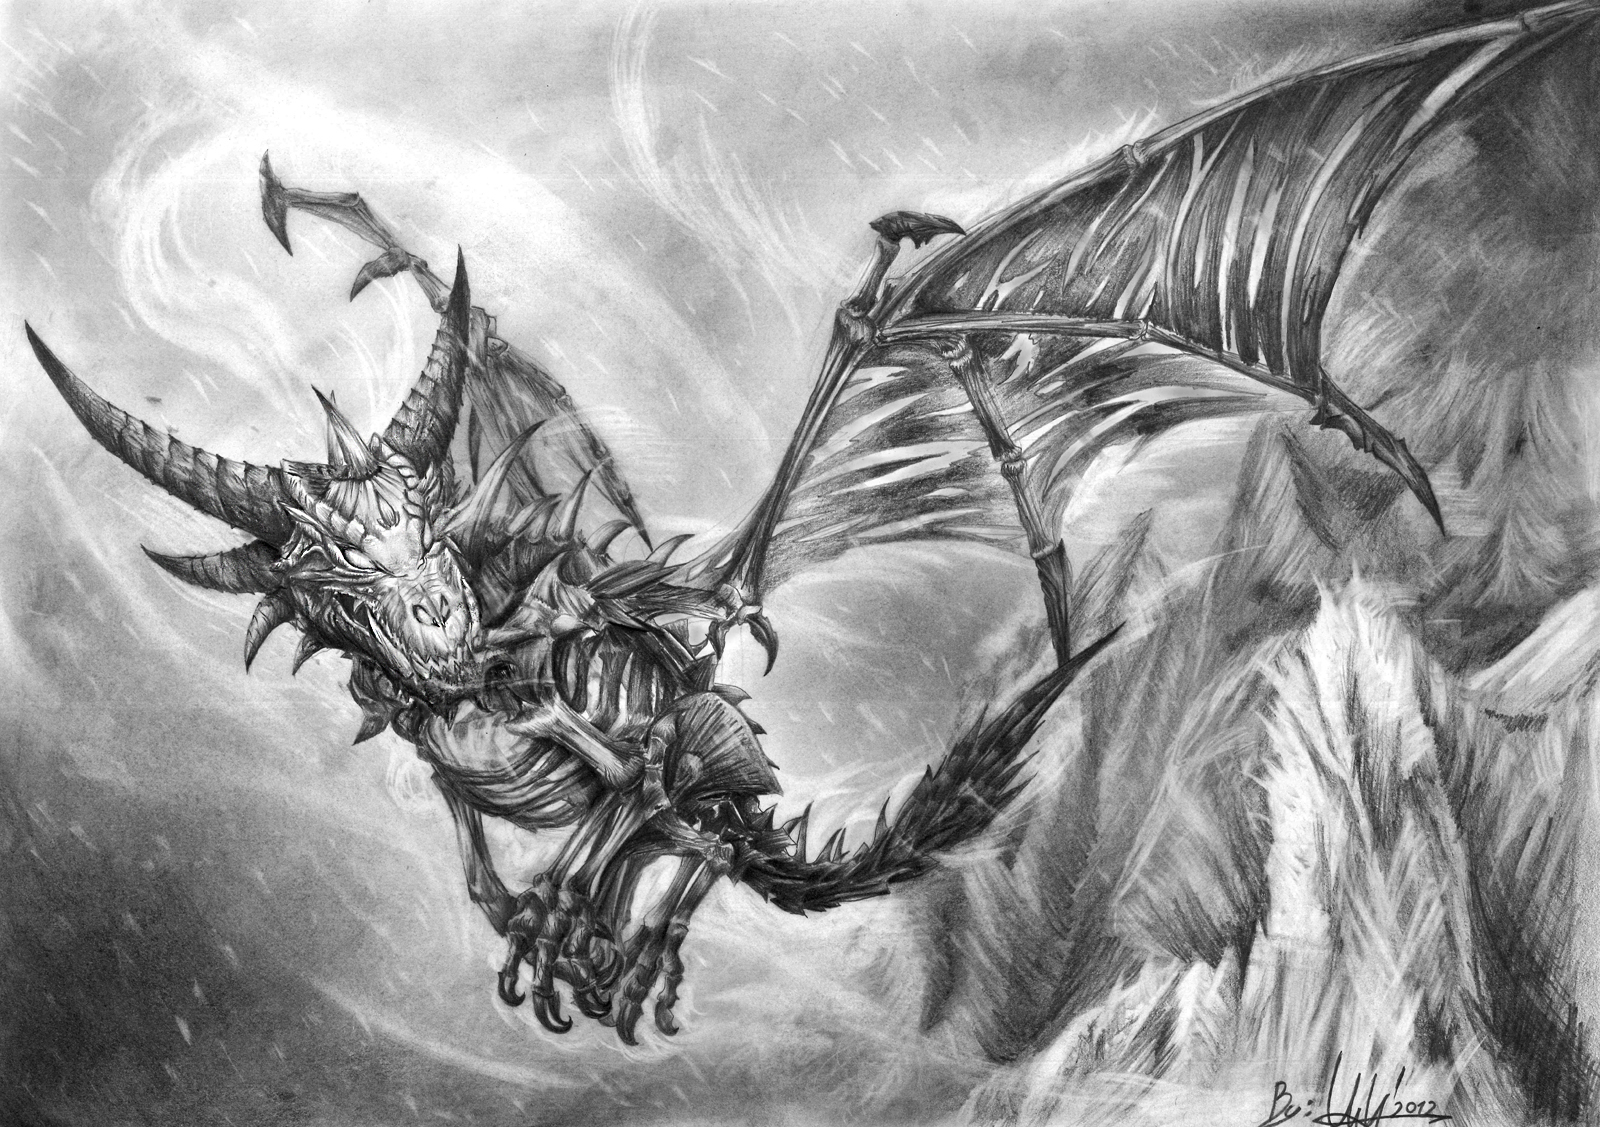 Sindragosa Rises by icecrown88 on DeviantArt